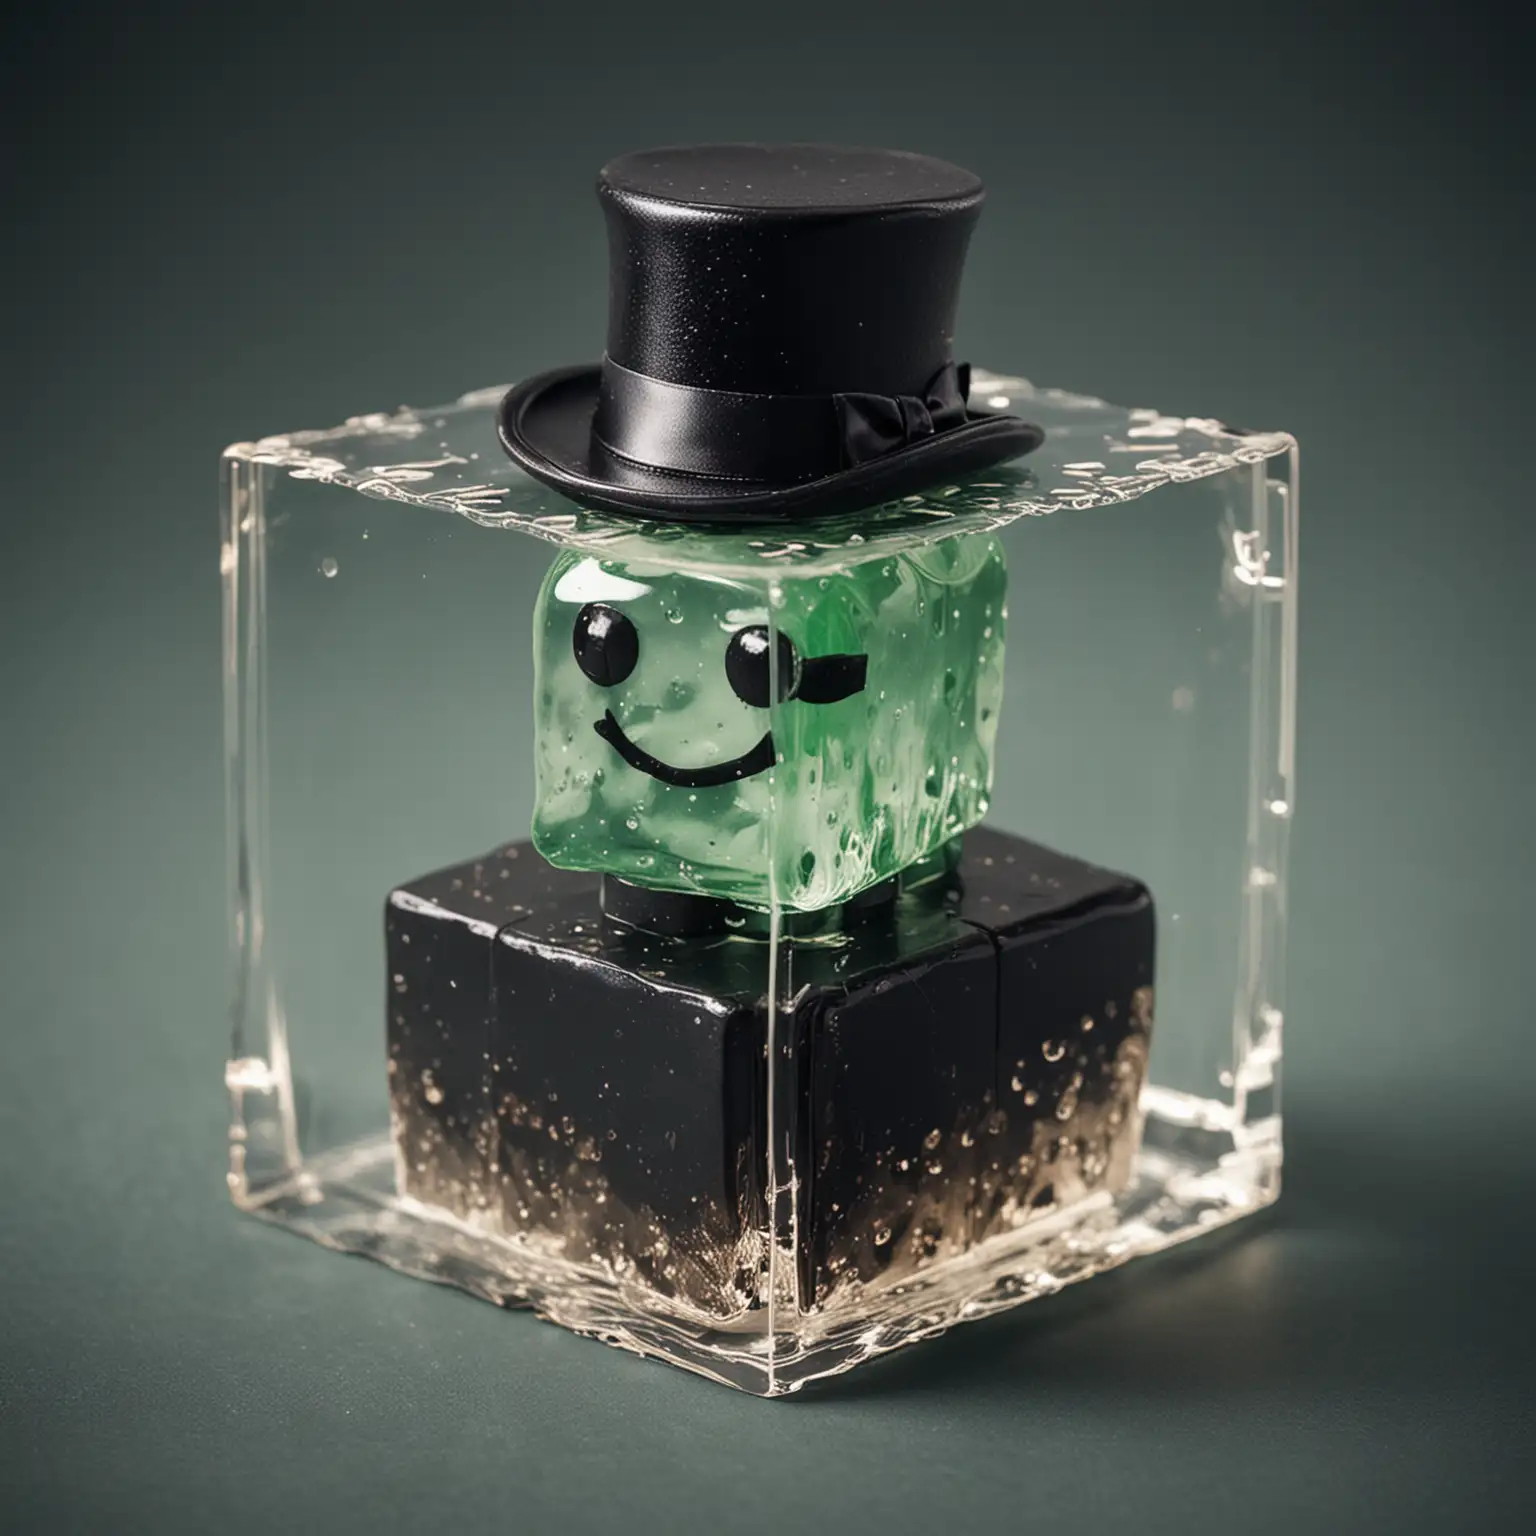 Colorful Gelatinous Mini Cube with a Top Hat